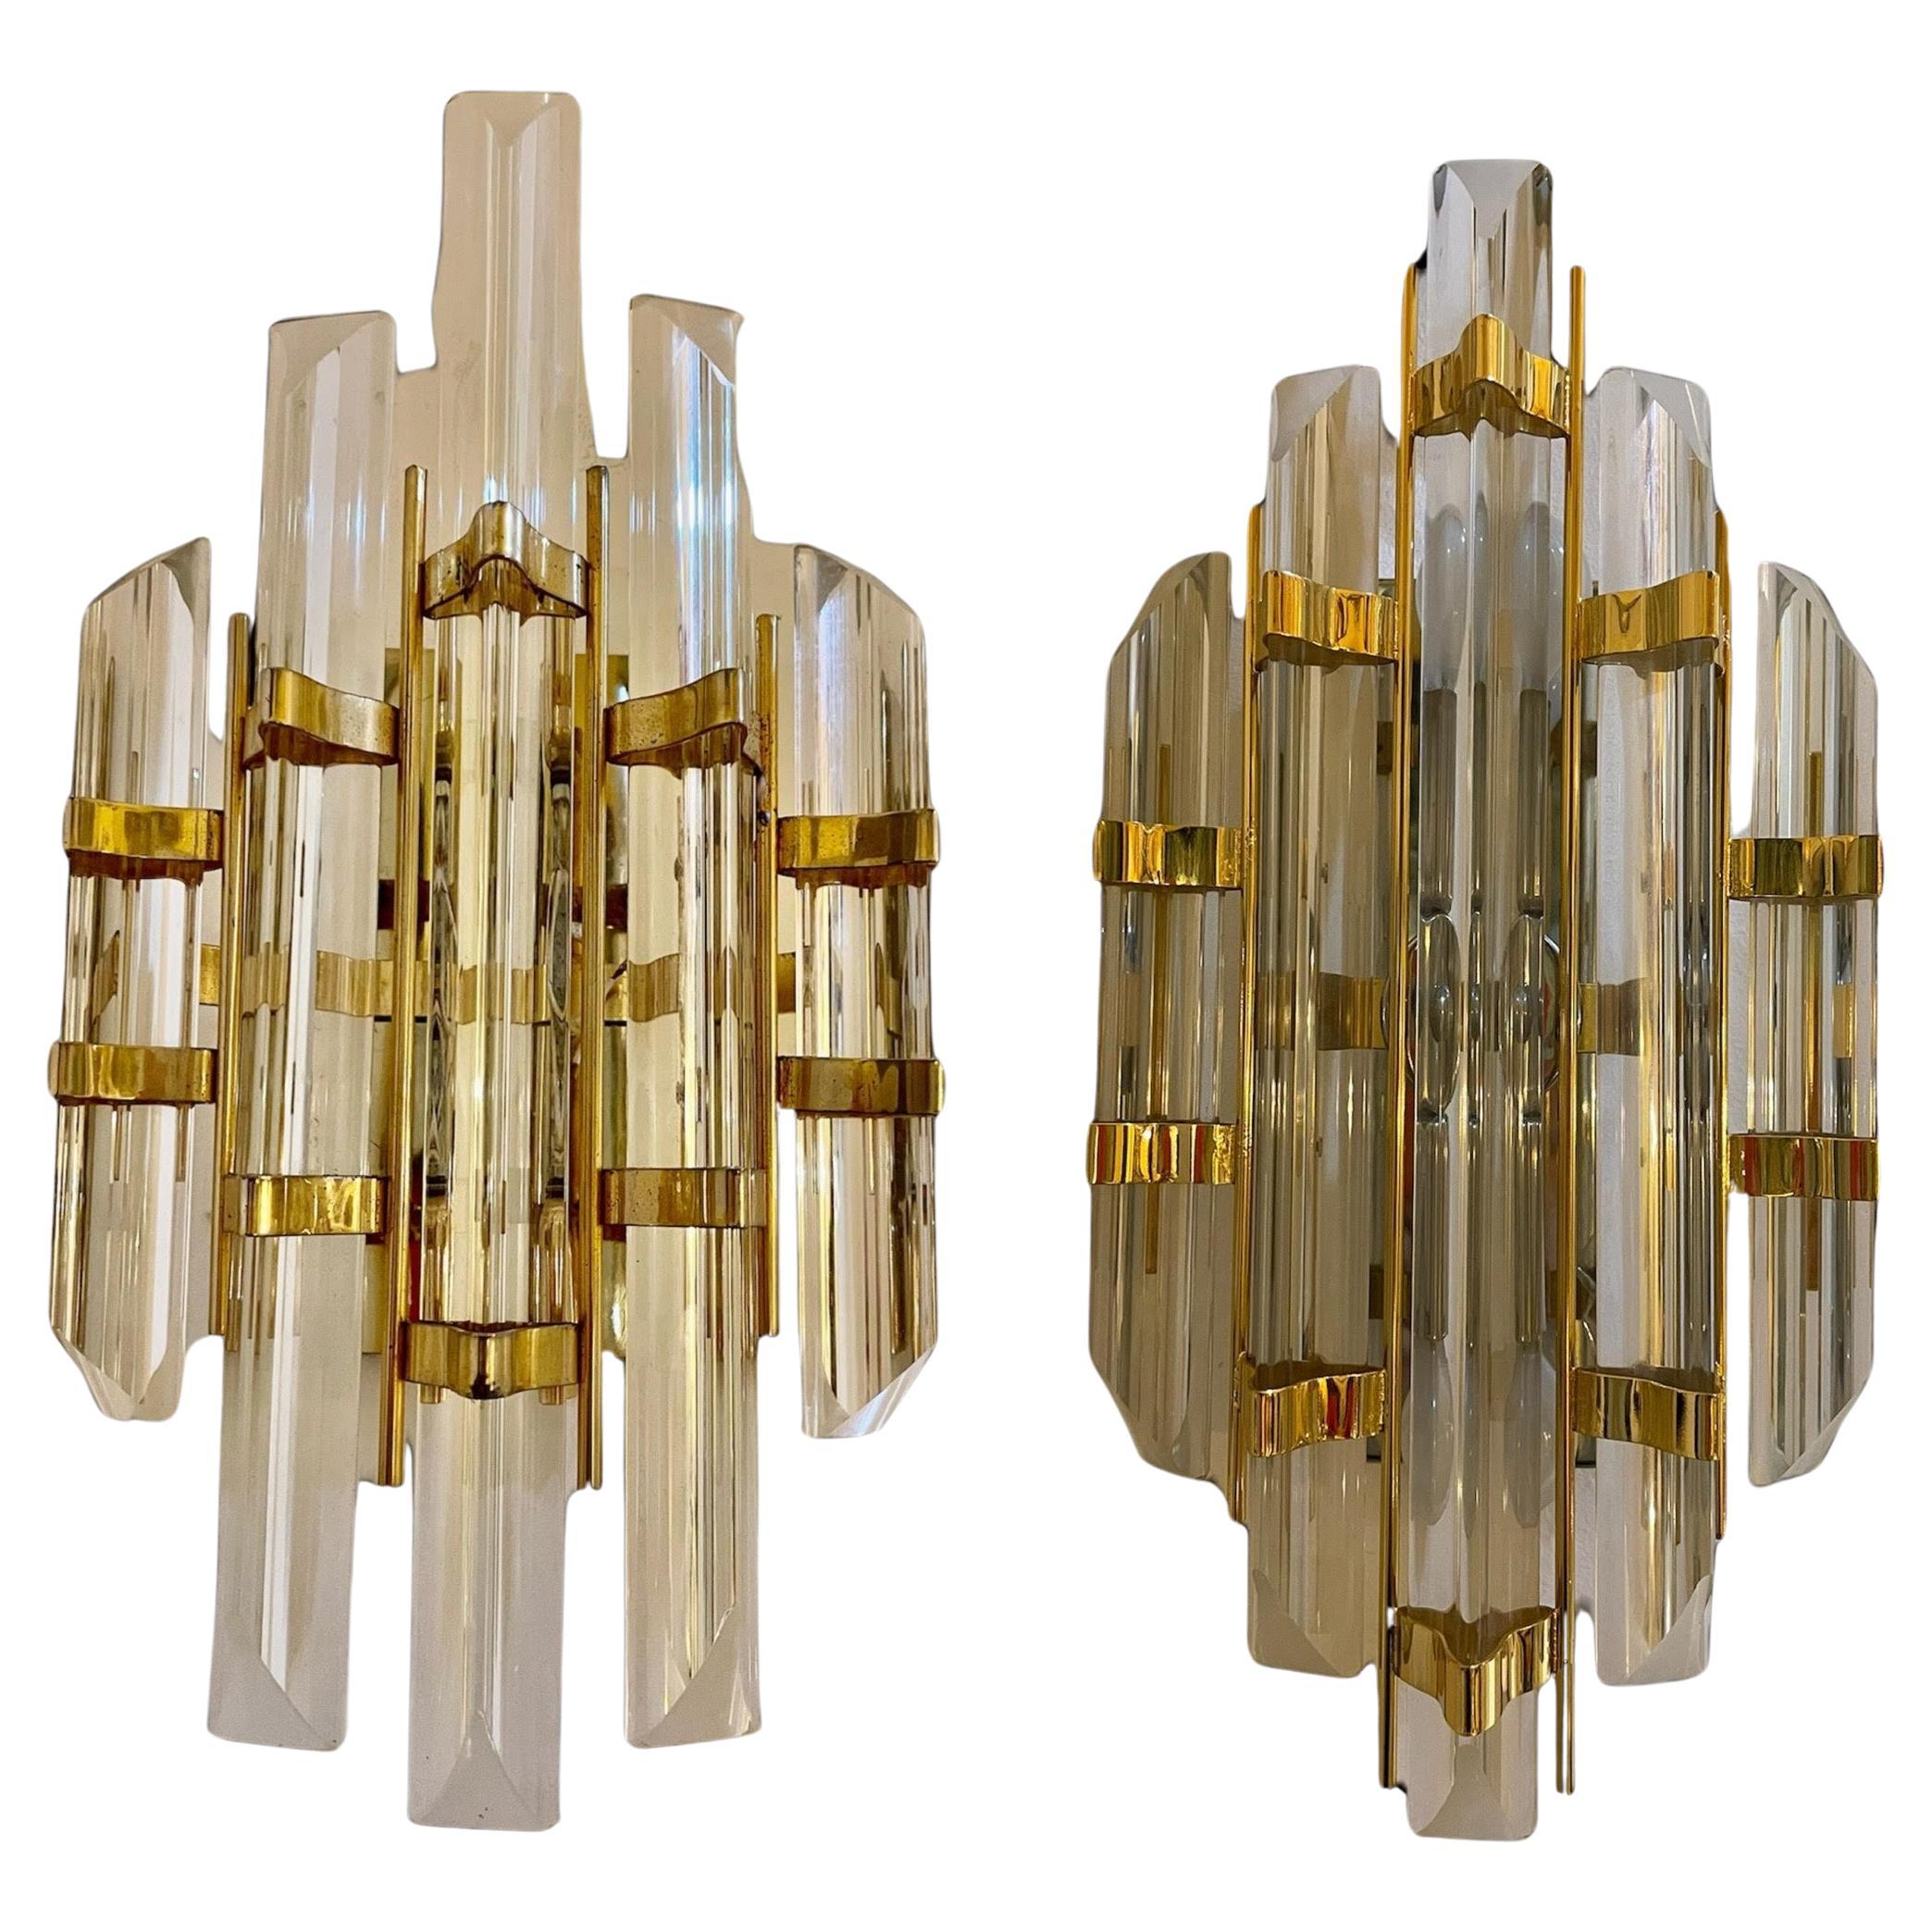 Venini Wall Lighting Pair Glass with Gilt Gold Structure, Italy, 1970